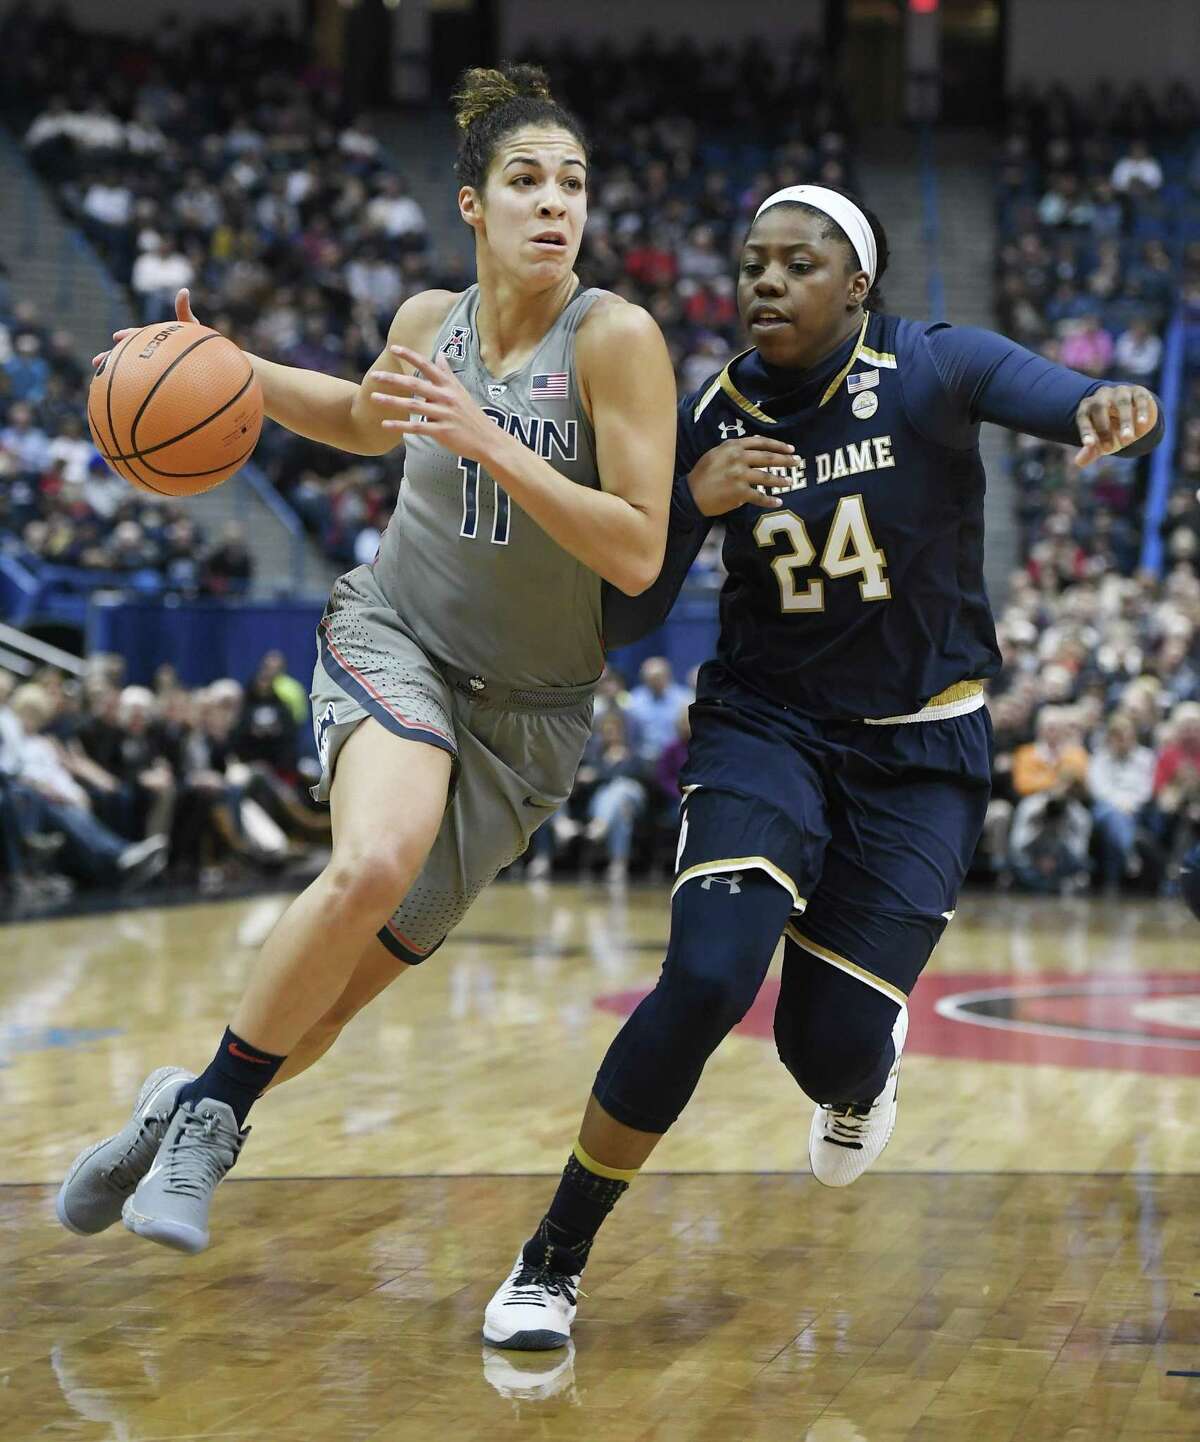 UConn’s Kia Nurse dribbles as Notre Dame's Arike Ogunbowale defends during the first half Sunday in Hartford.